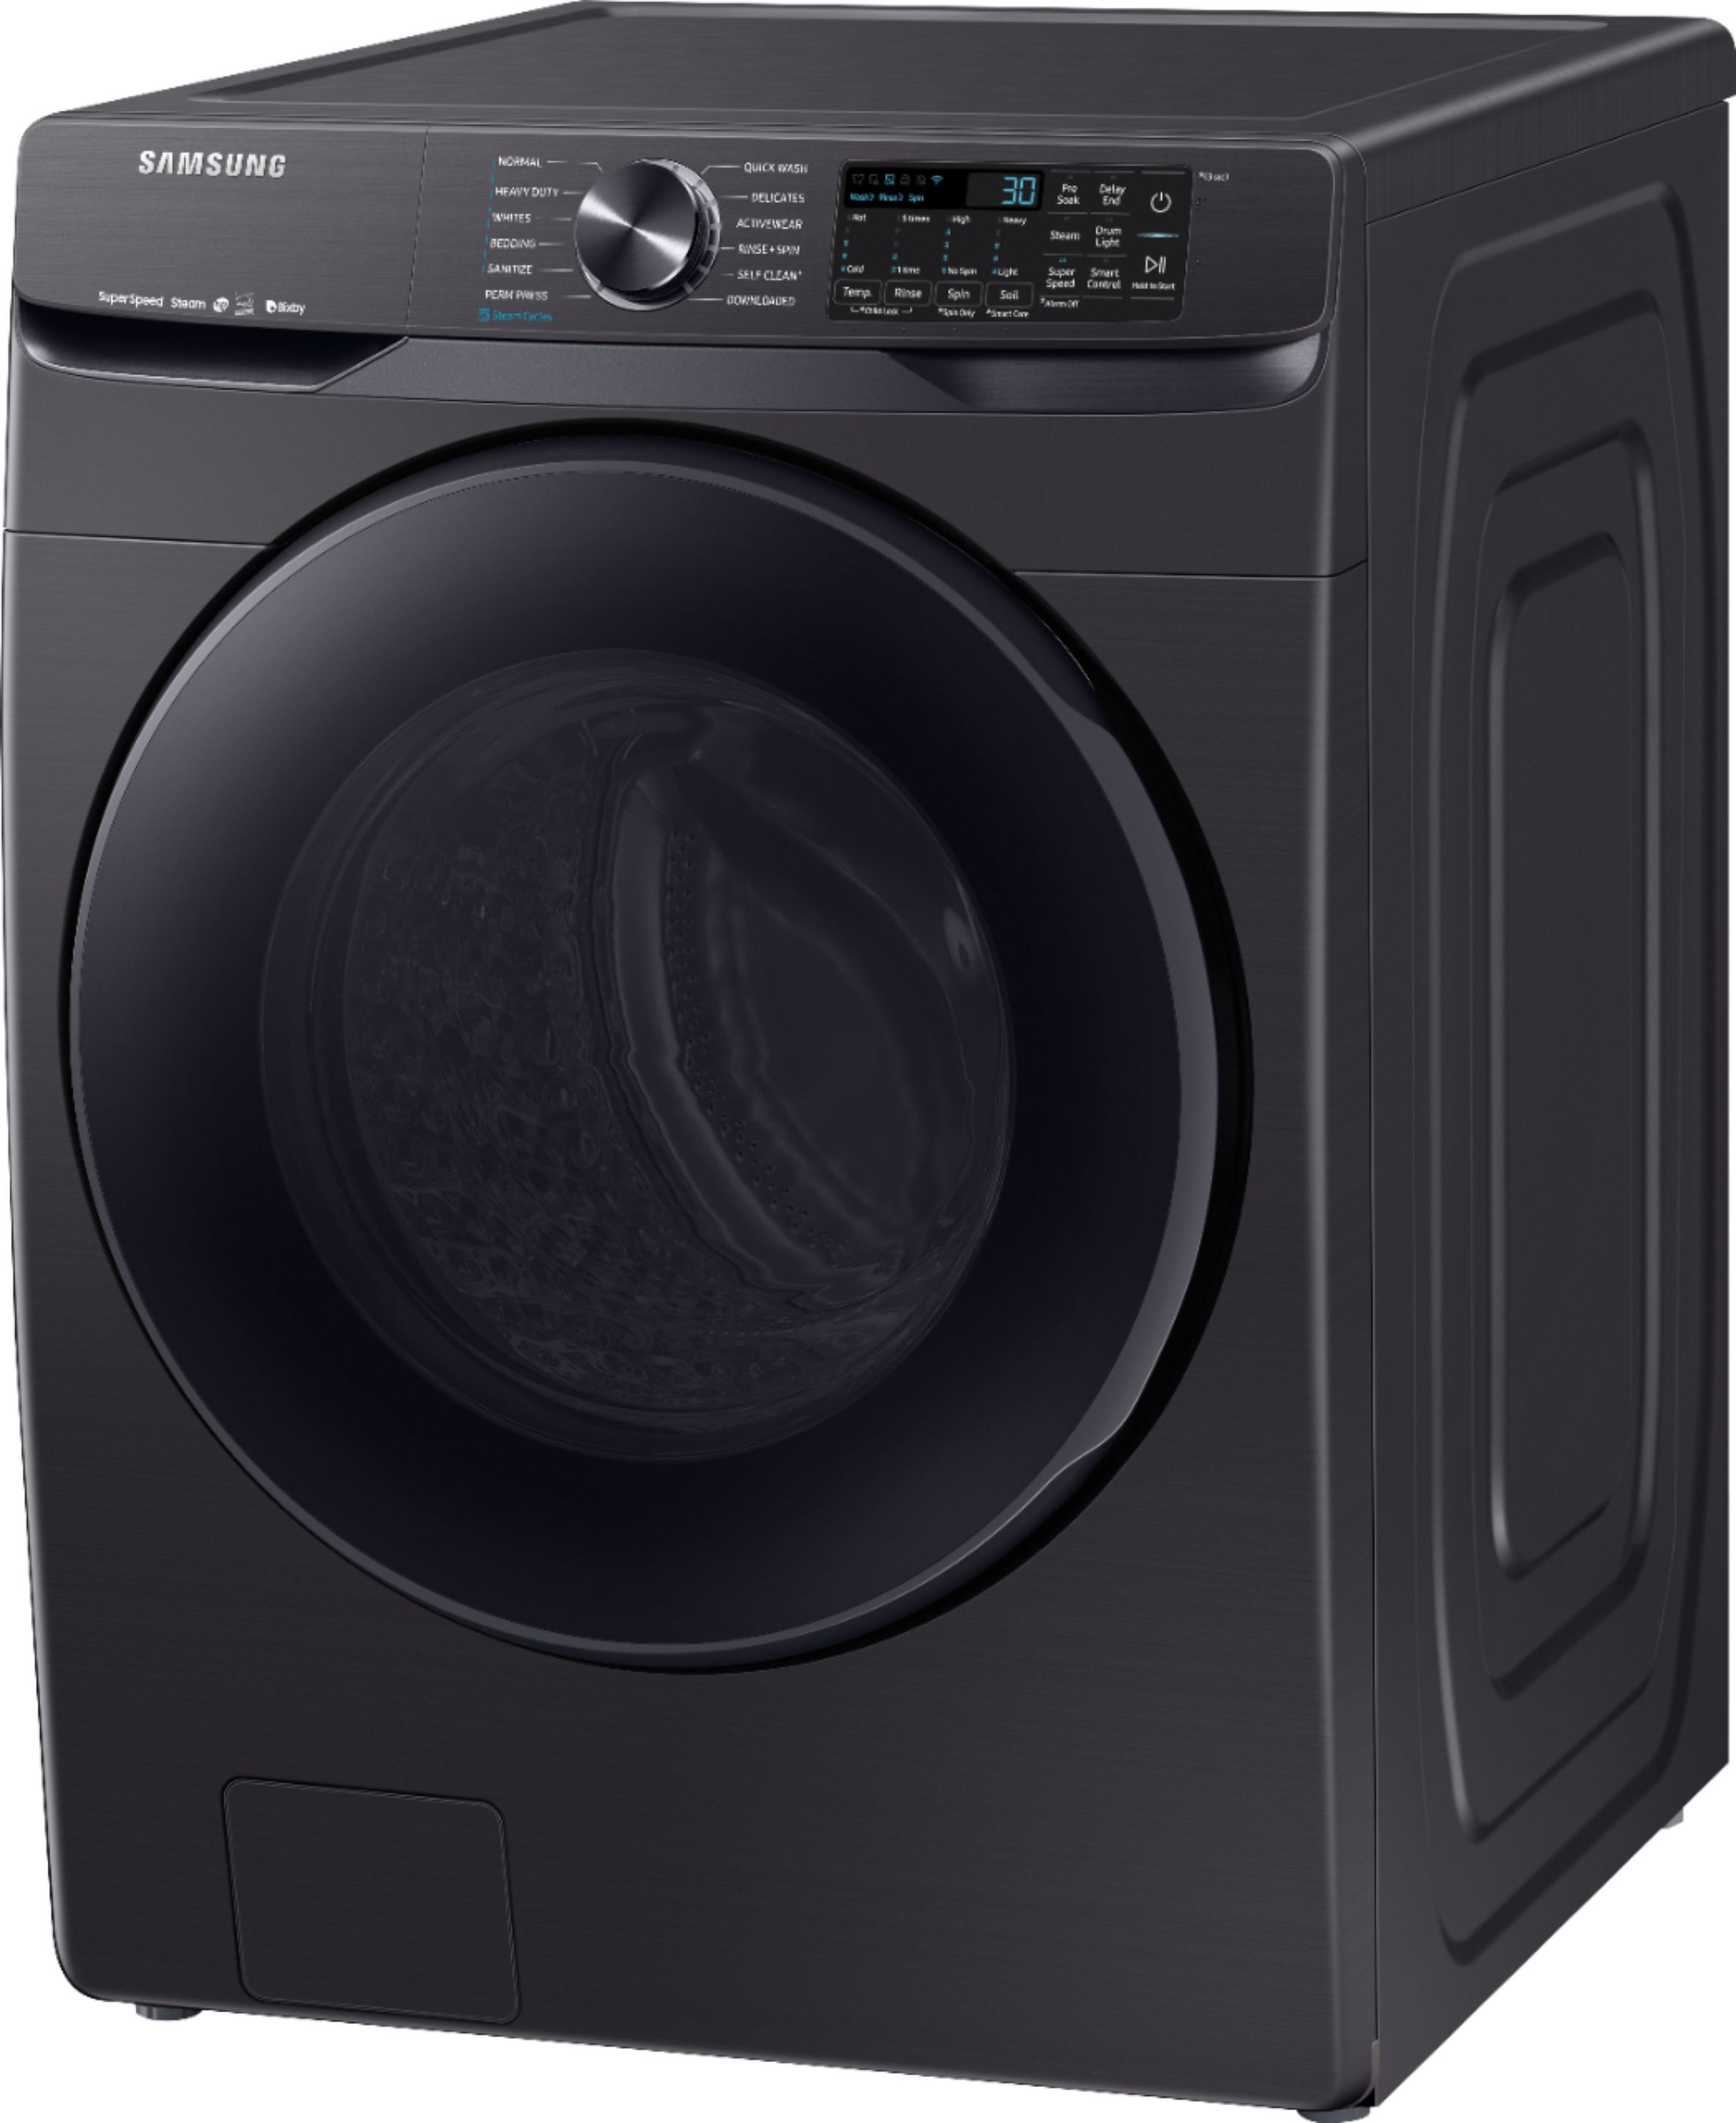 Left View: Samsung WF50A8800AV - Washing machine - Wi-Fi - width: 27 in - depth: 33.5 in - height: 38.7 in - front loading - 5 cu. ft - 1200 rpm - brushed black